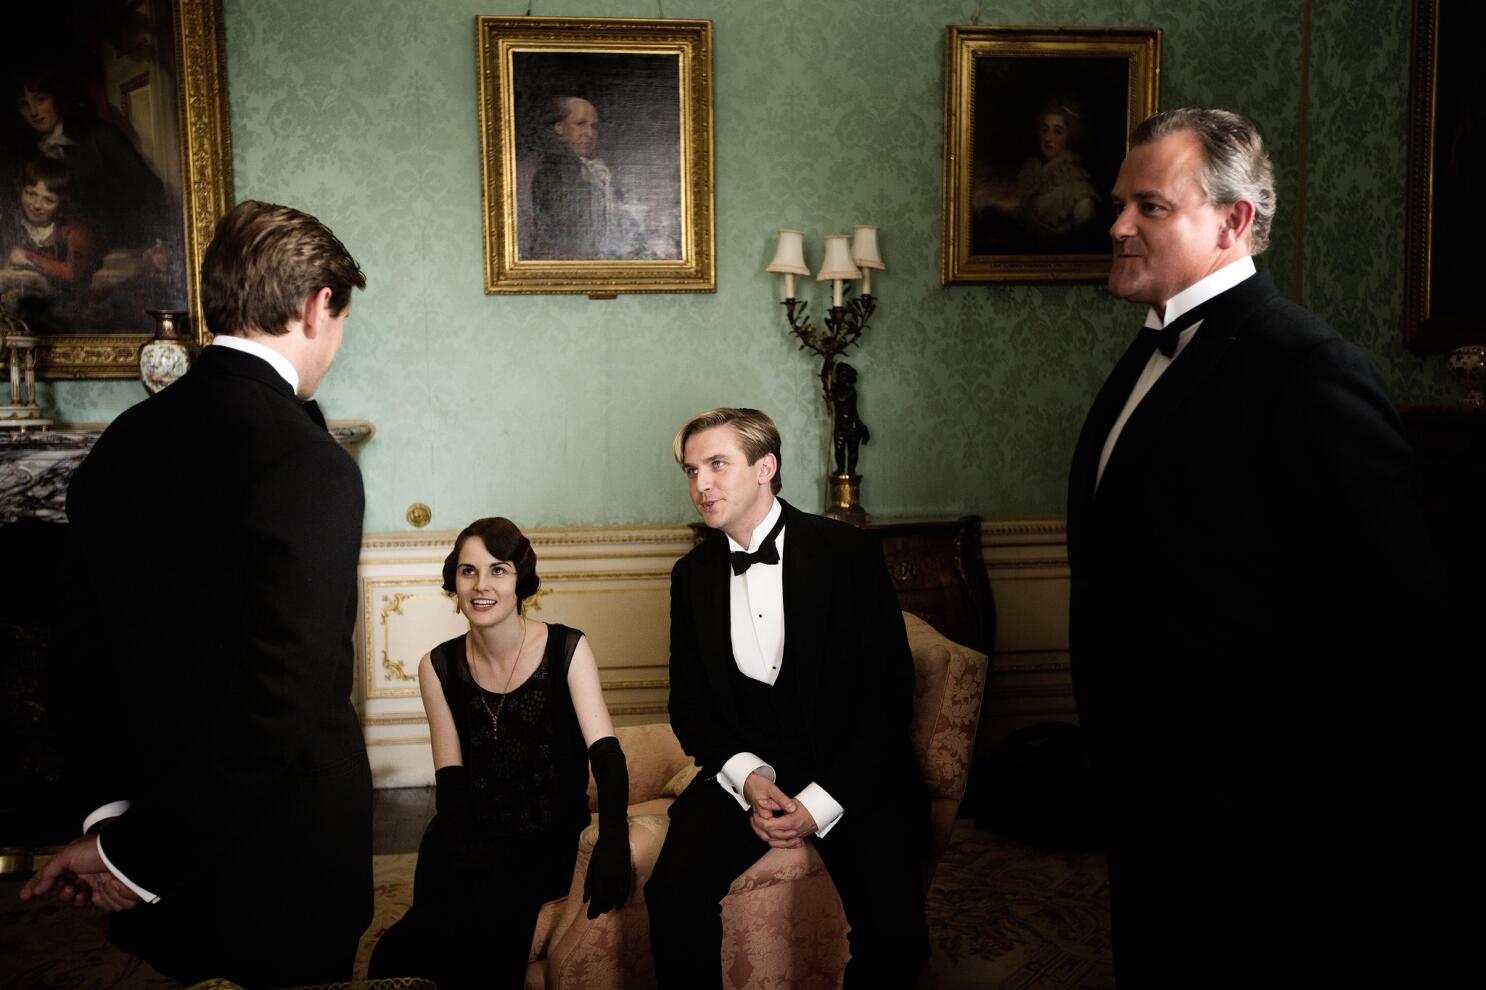 Downton Abbey' Review: Film Version Makes Room for a Royal Visit